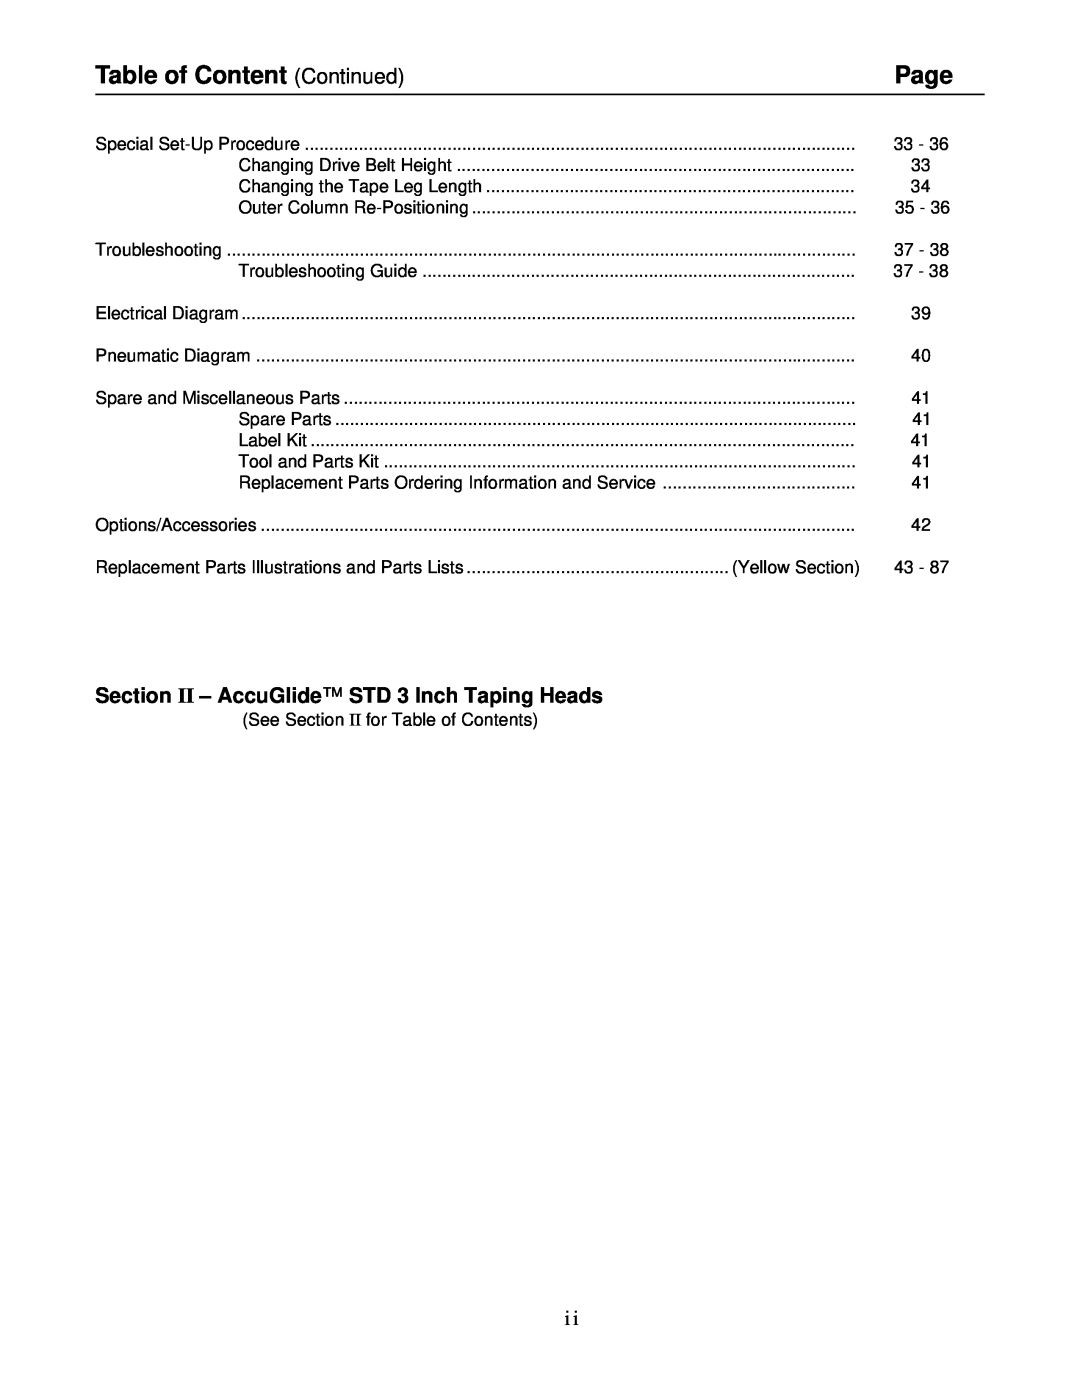 3M 39600 manual Table of Content Continued, Page, Section II - AccuGlide STD 3 Inch Taping Heads 